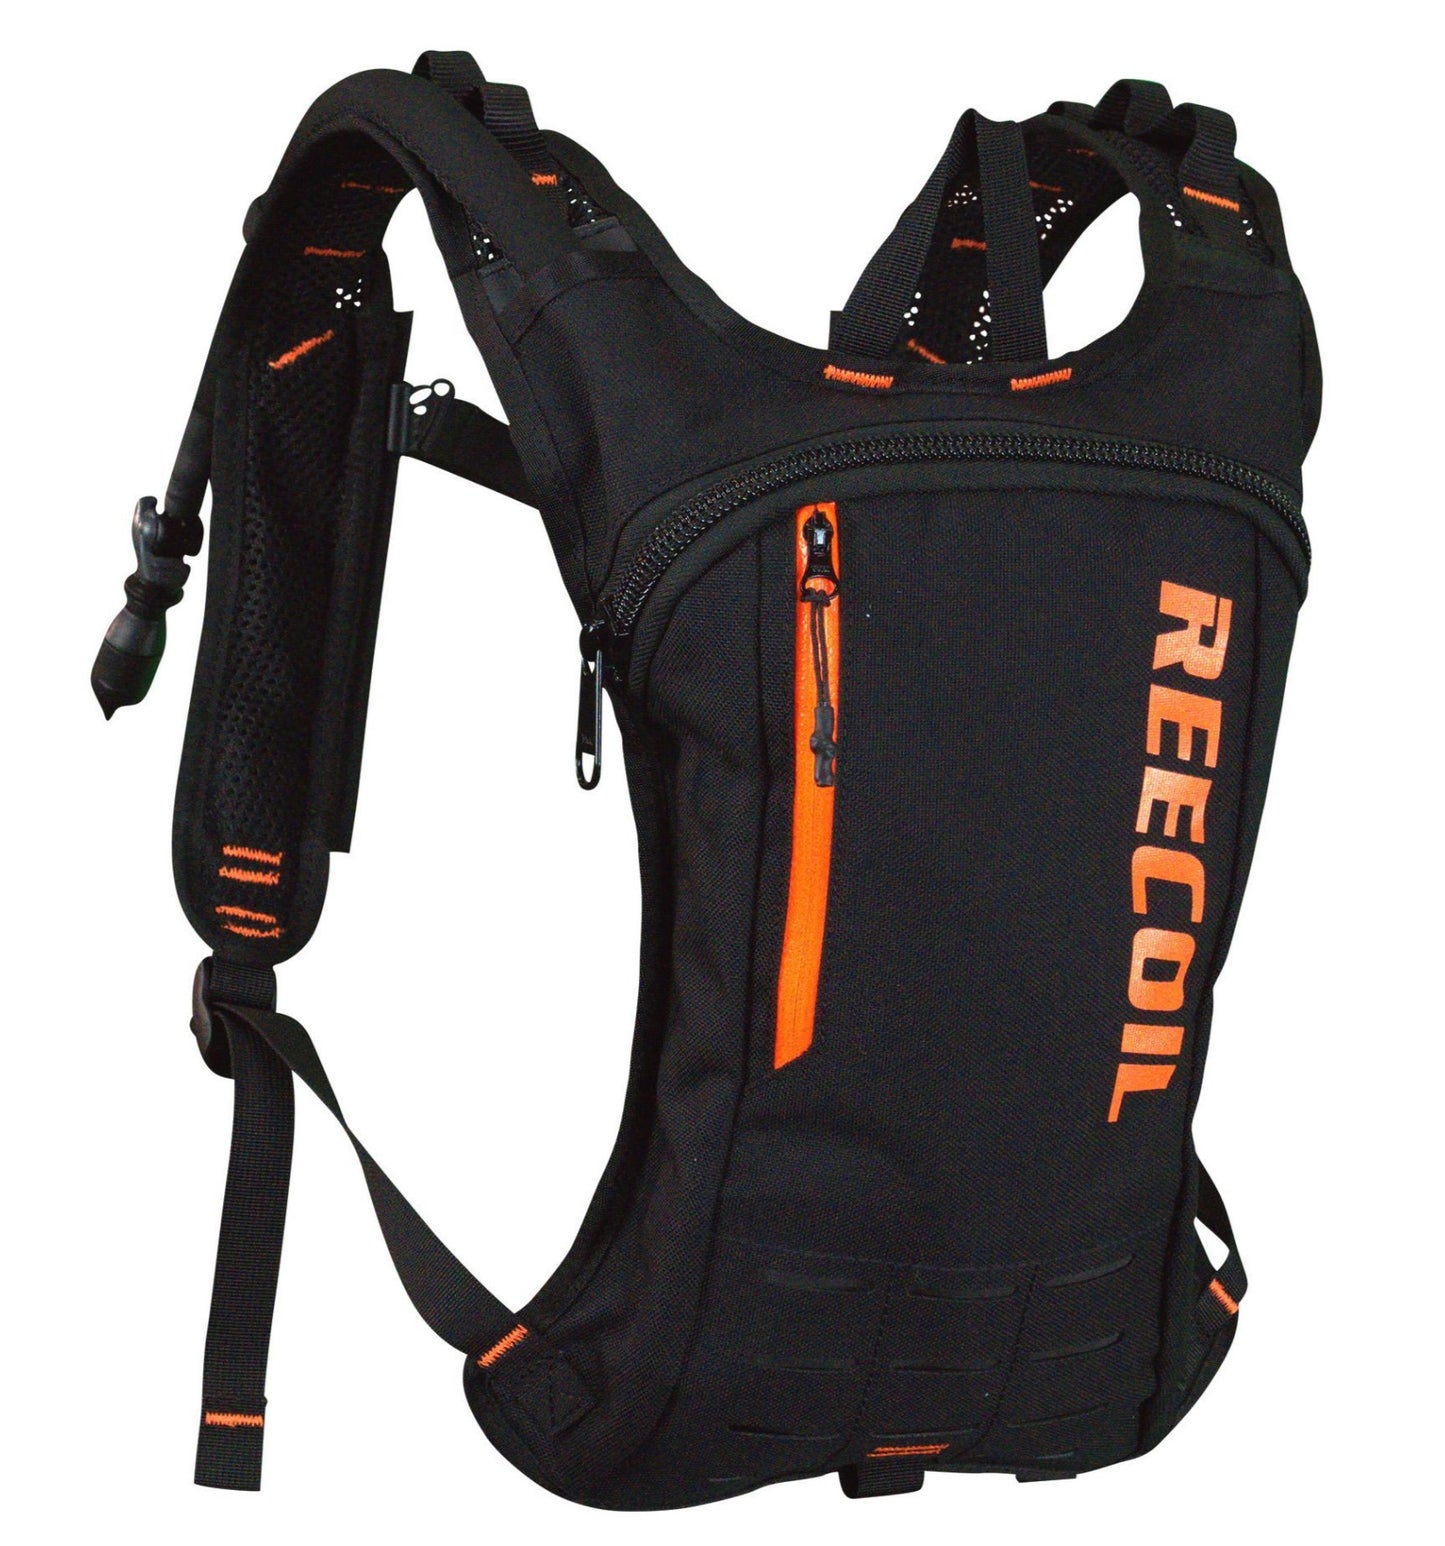 REECOIL AUDAX™ 1500 HYDRATION HARNESS